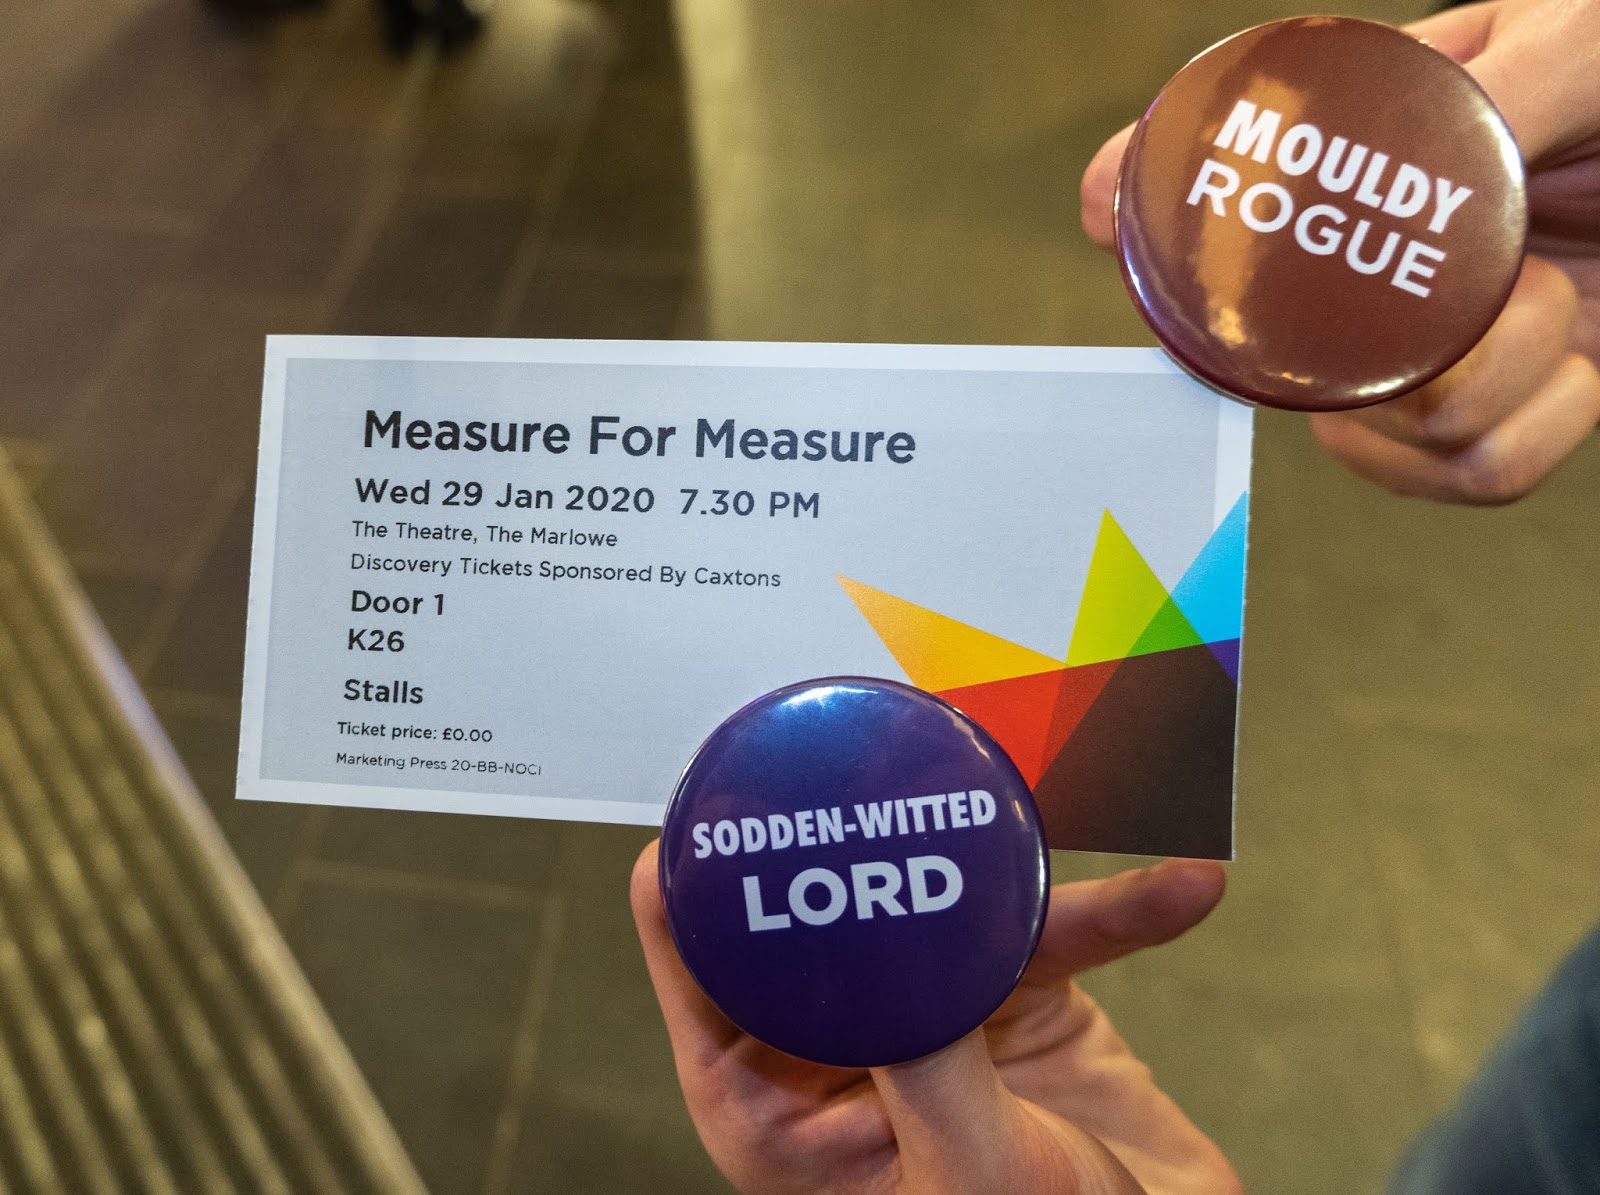 Our Measure For Measure tickets and complimentary Shakespearian insult badges